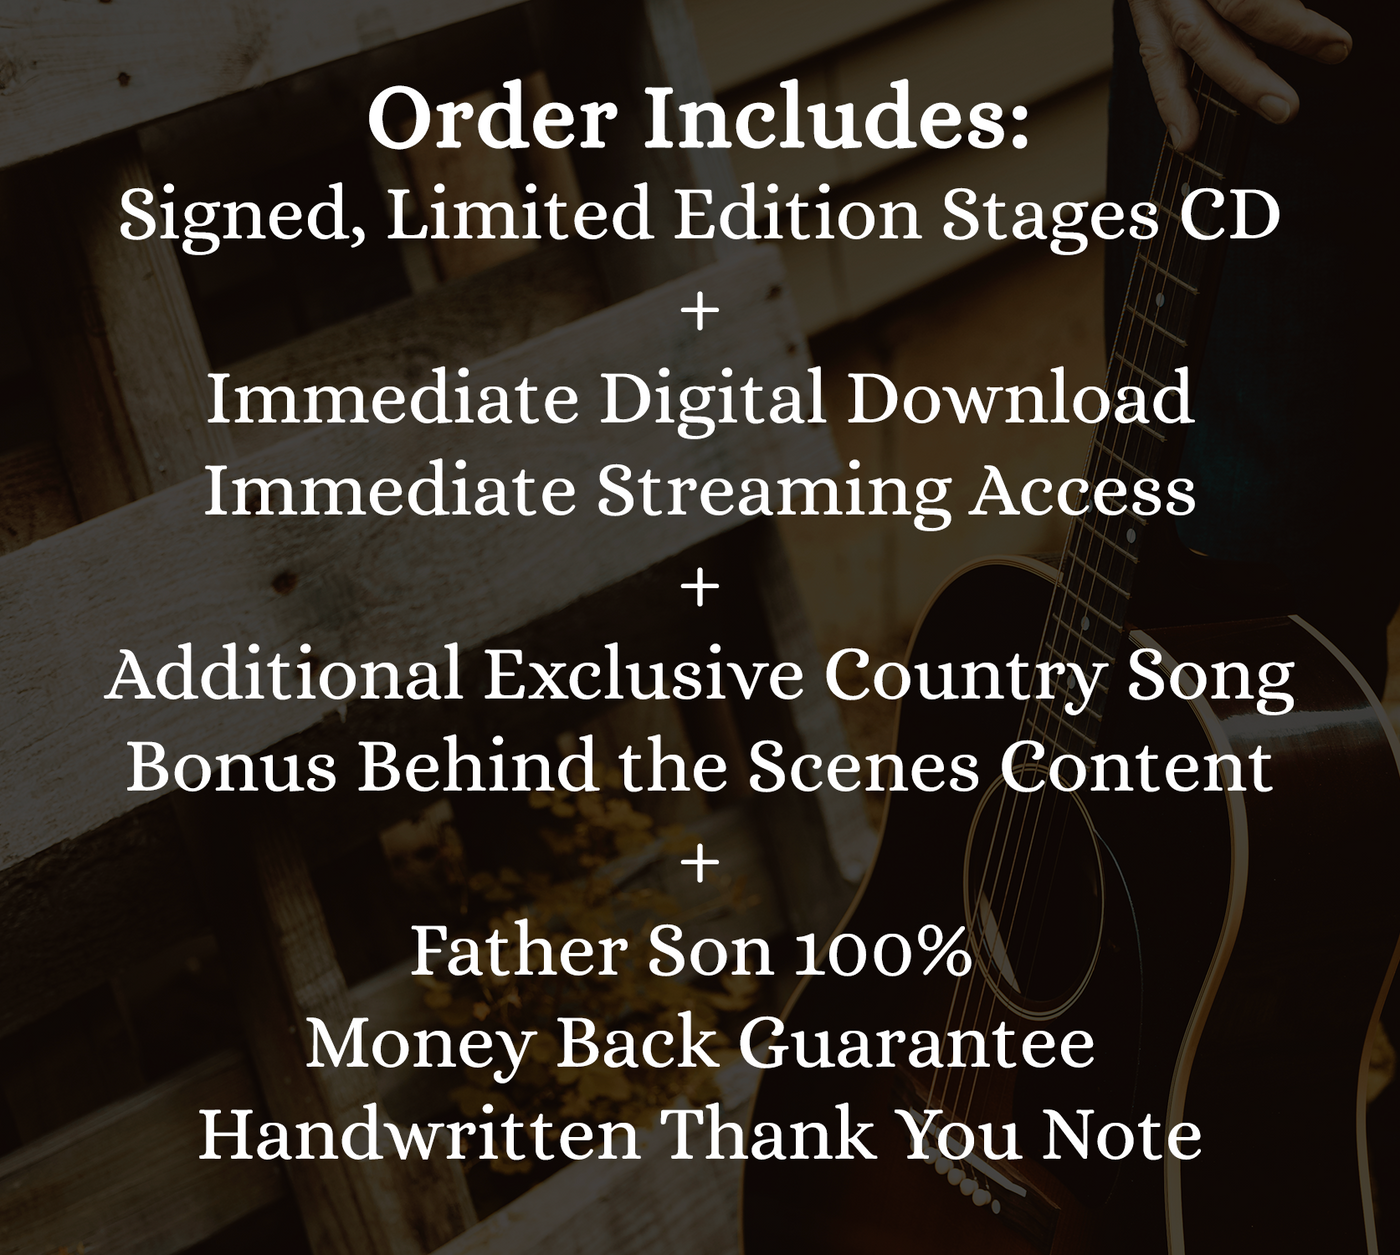 Stages - Signed CD, Digital, Streaming